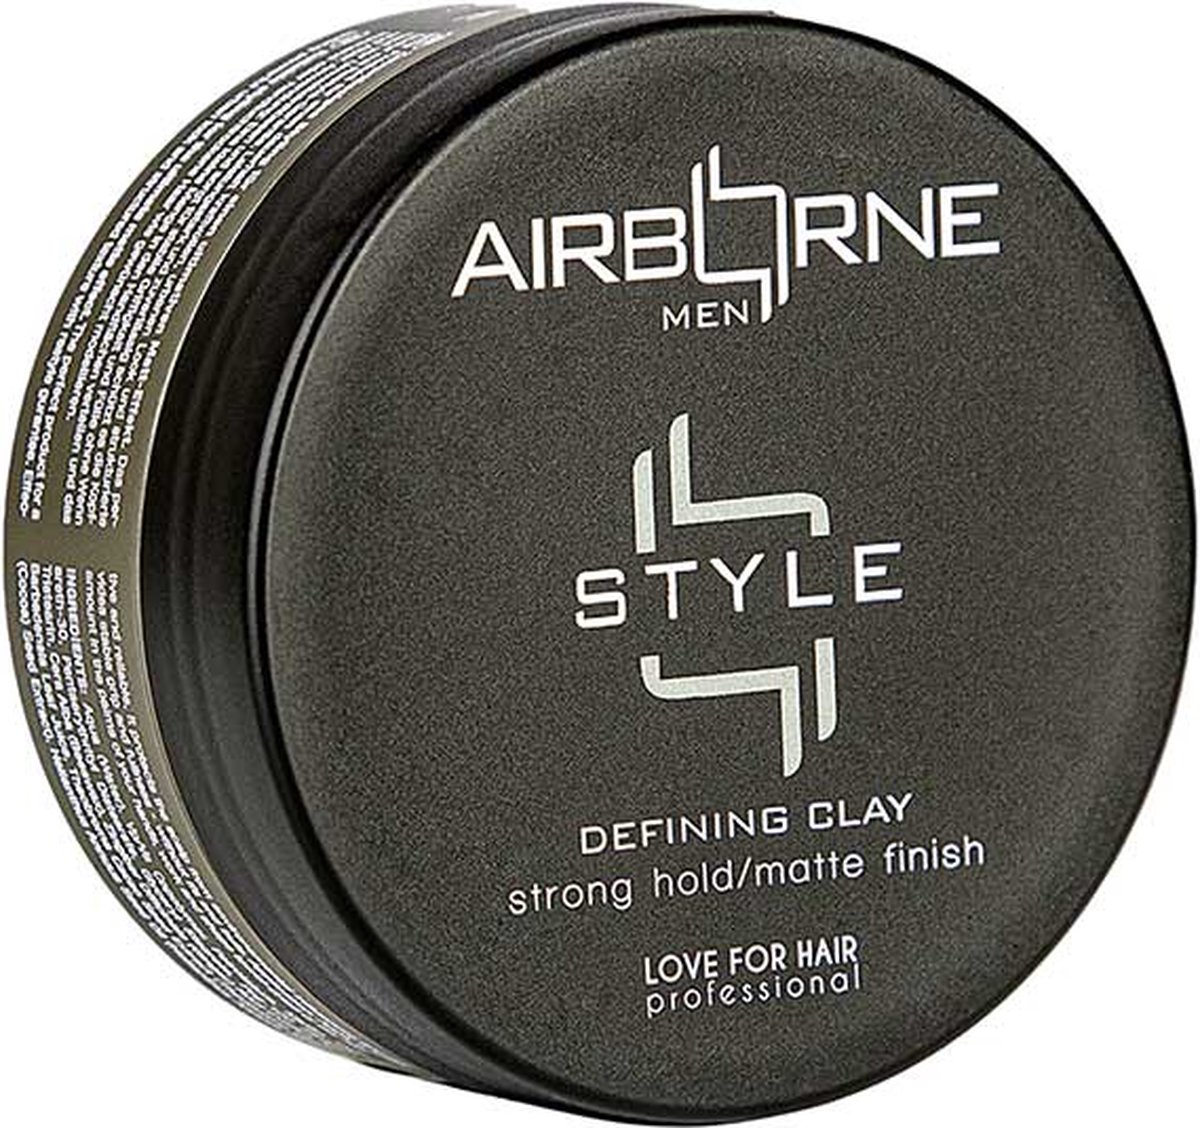 Airborne Style Defining Clay (100 ml)